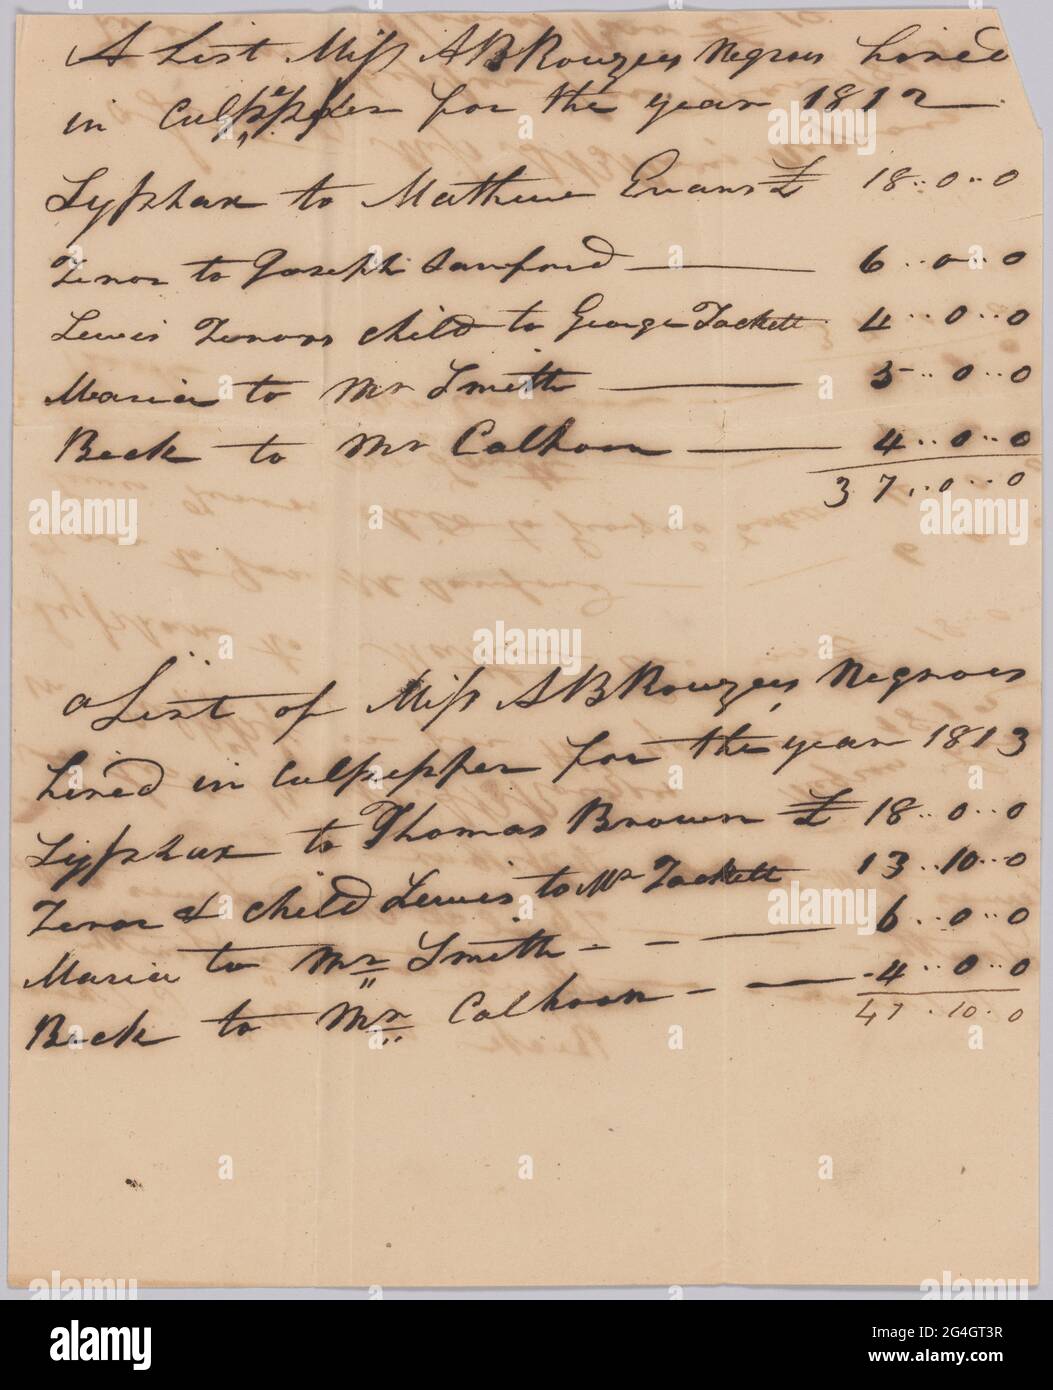 This document is from a collection of financial papers related to the plantation operations of several generations of the Rouzee Family in Essex County, Virginia. The papers date from the 1790s through 1860. This document contains lists of enslaved persons owned by A.B. Rouzee and hired out in Culpeper, Virginia. The list at the top documents the hires for 1812 and the list below it documents the hires for 1813. The lists consist of the name of the enslaved person, the name of the person who hired the enslaved person, and the amount owed A.B. Rouzee for the labor or services provided by the en Stock Photo